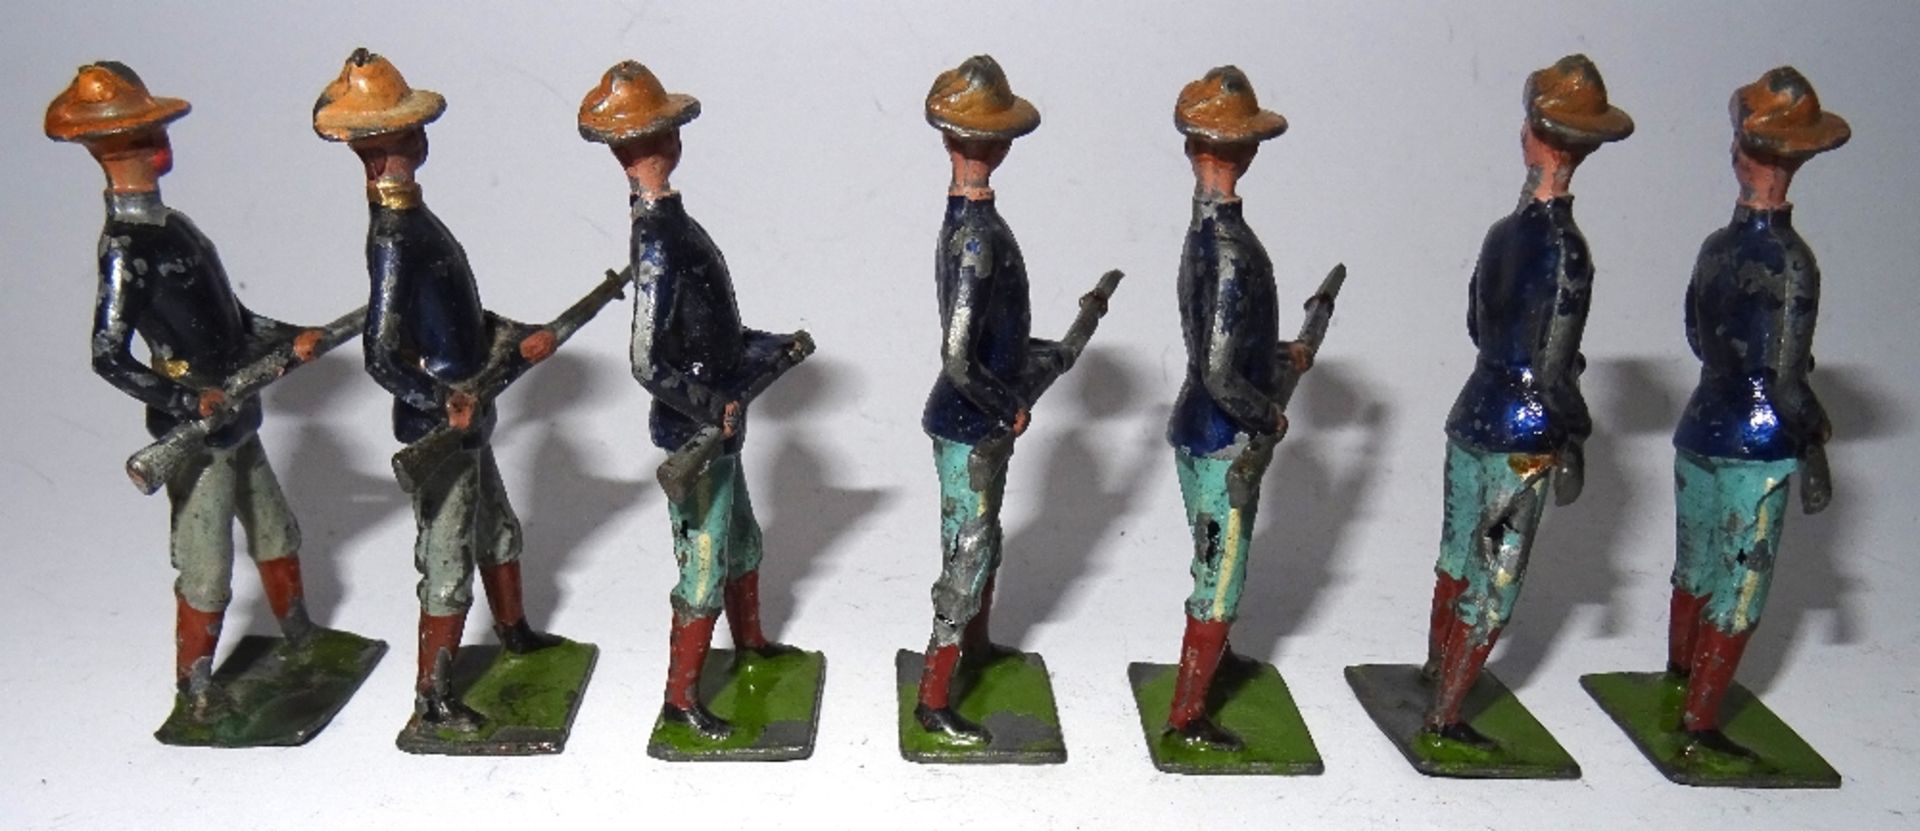 Britains from set 91, US Infantry - Image 4 of 4